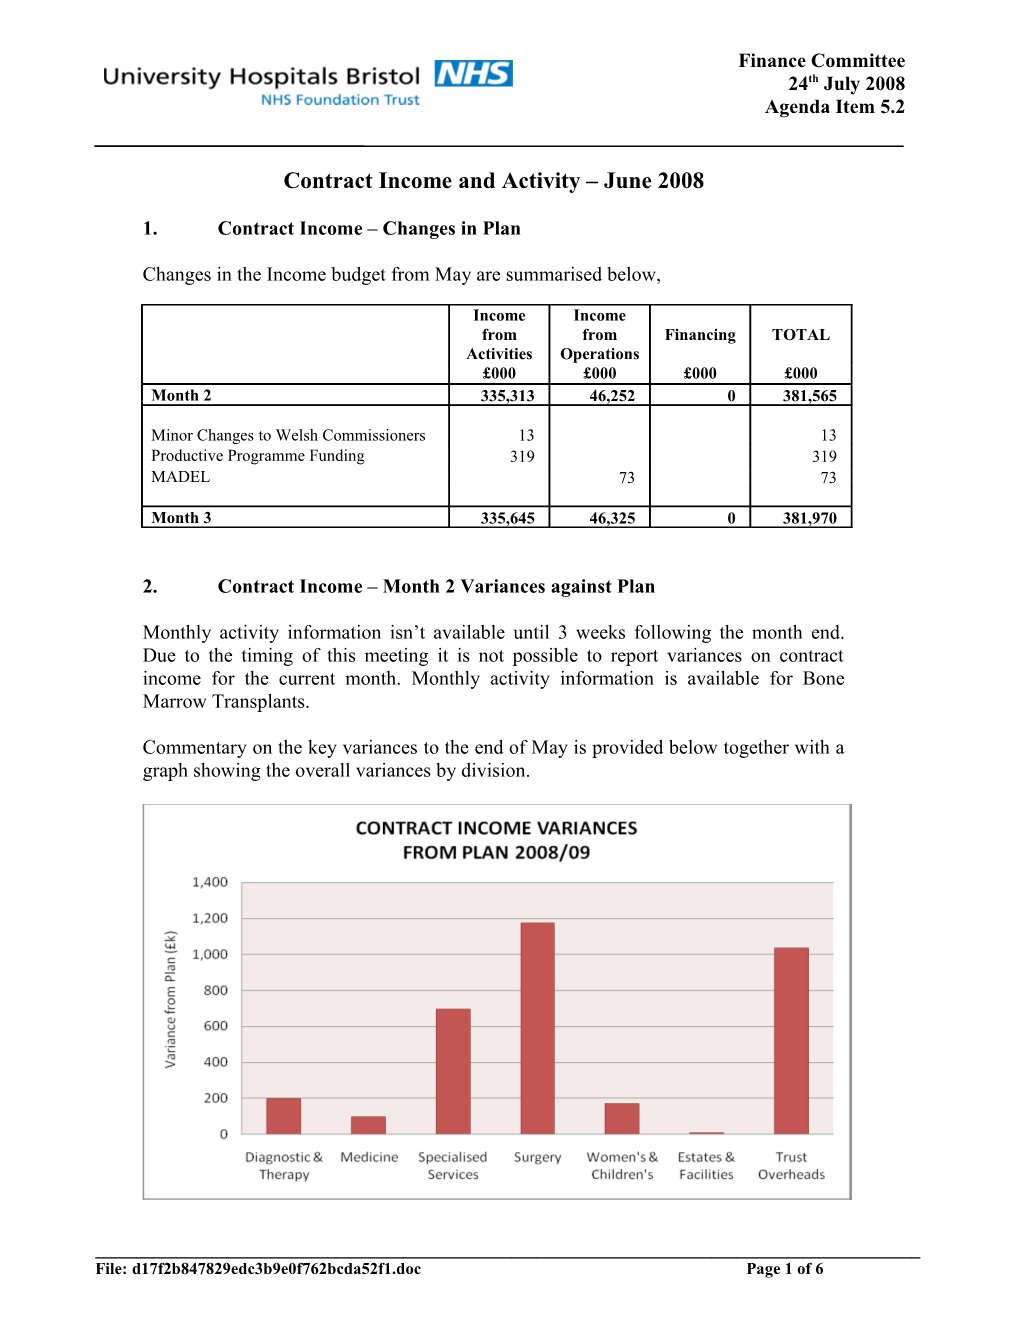 Contract Income and Activity June 2008